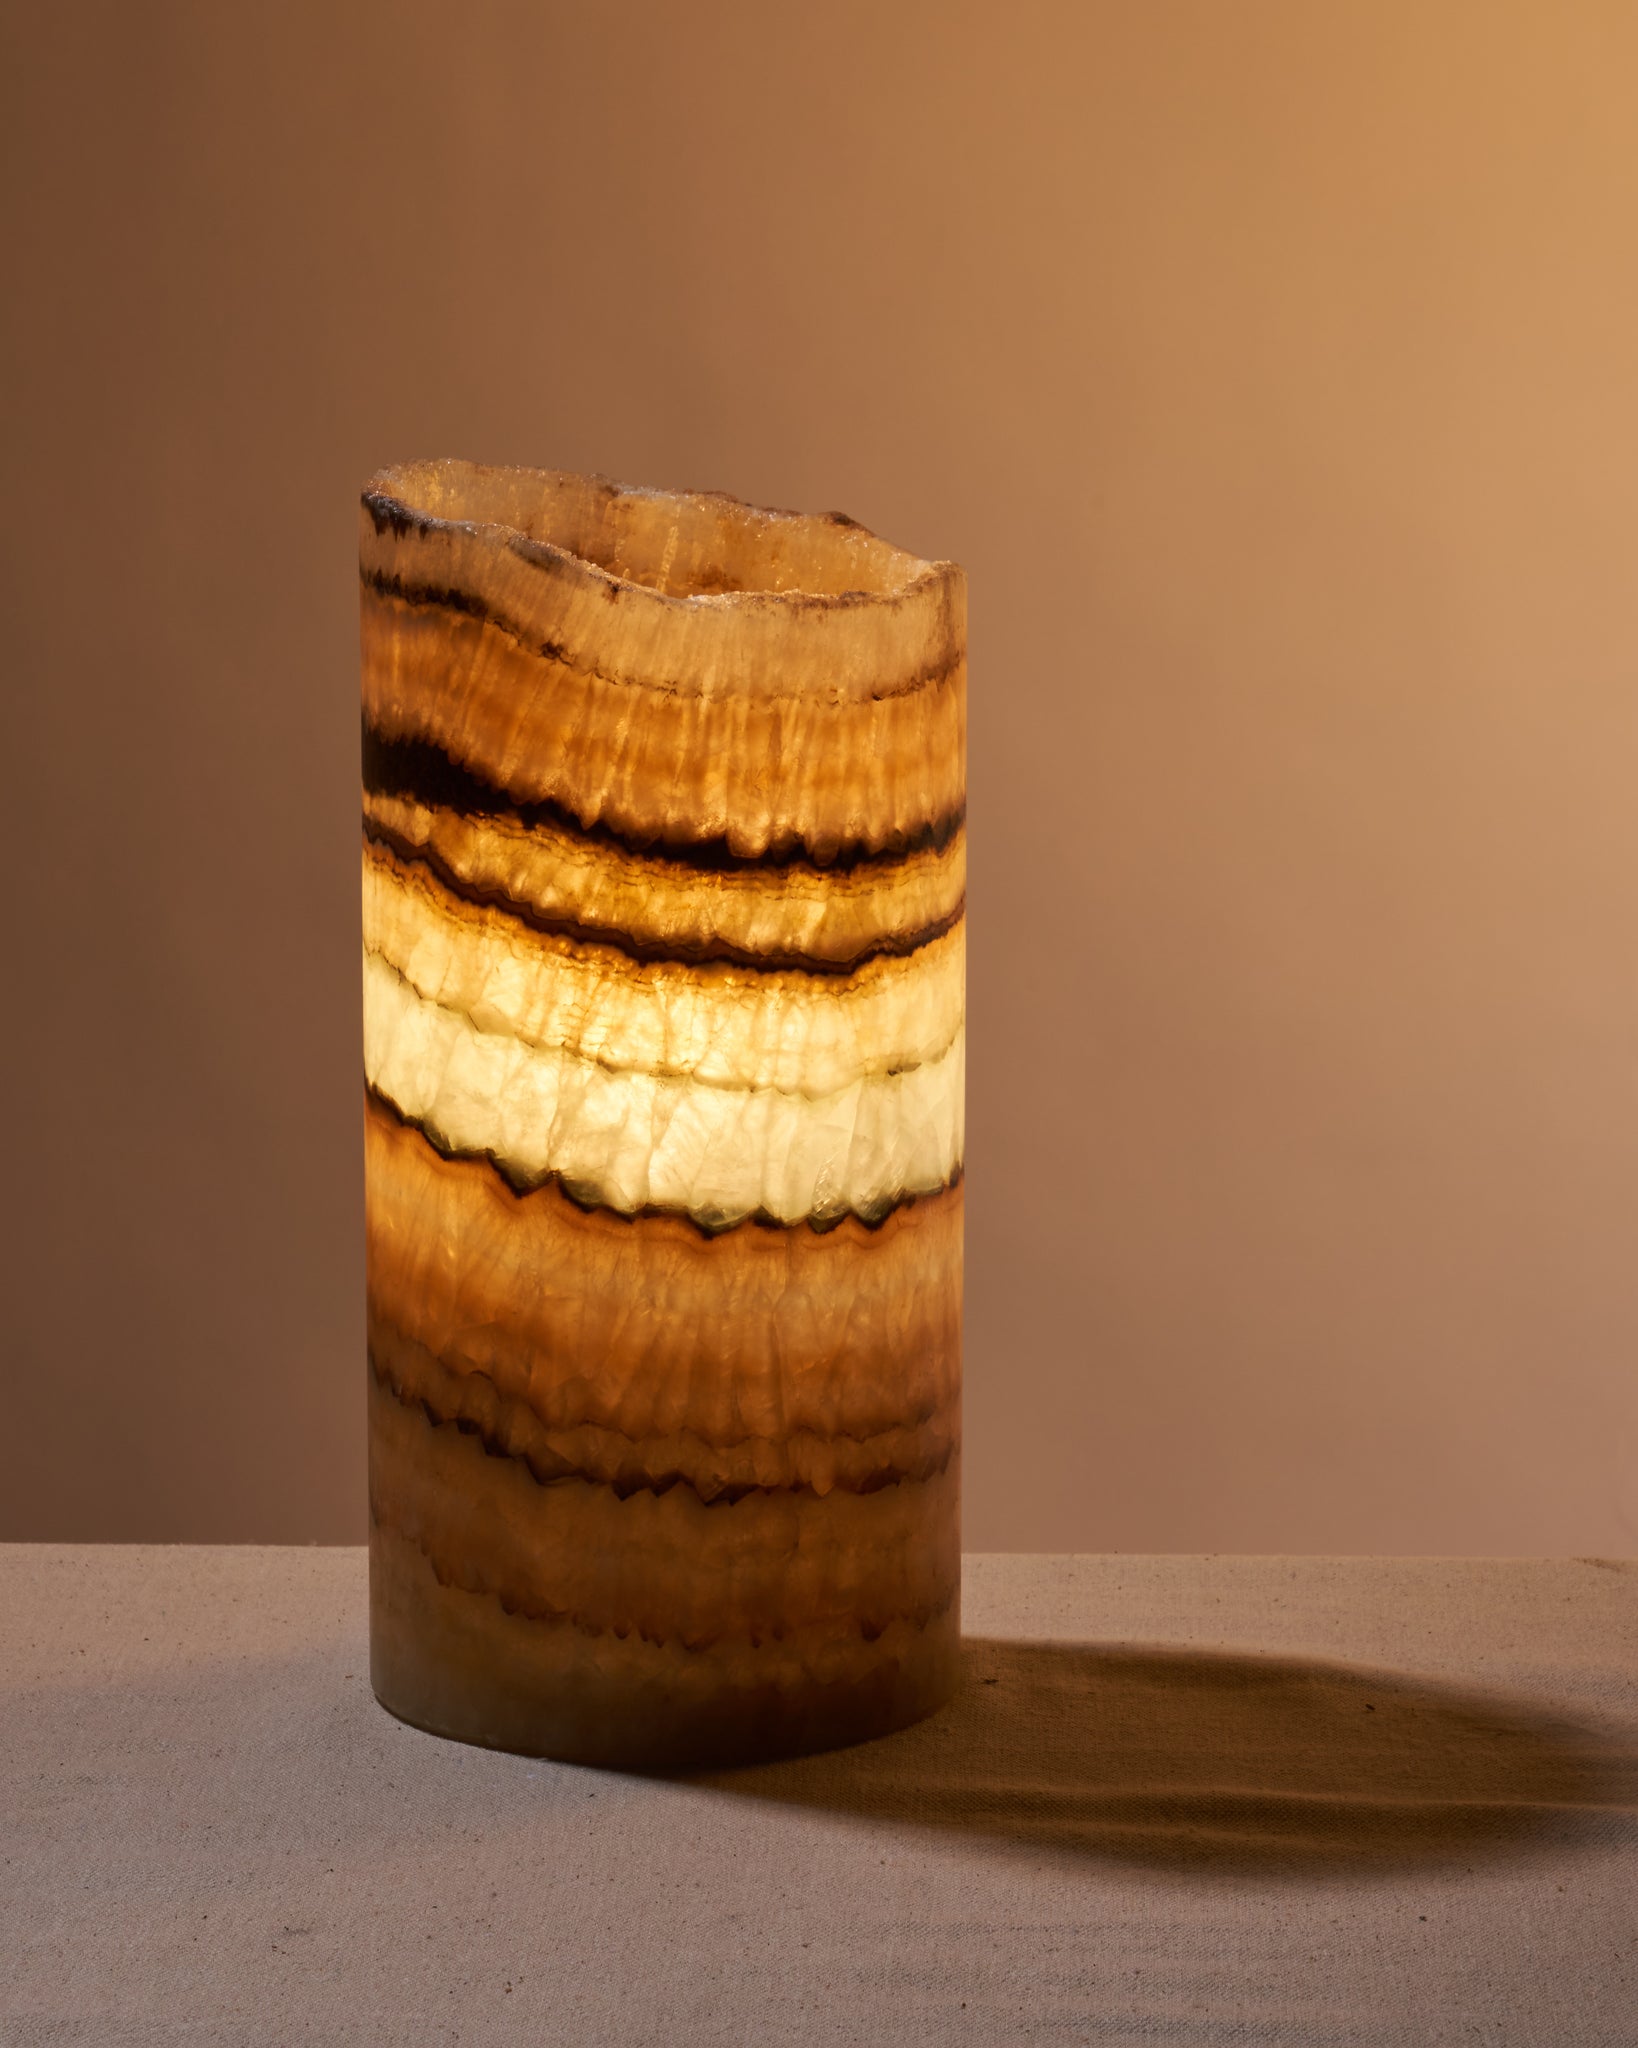 Illuminate your space with Mexican Onyx lamp's protective vibes. Ideal for decor and gifting. Included: One polished, cut base Mexican Onyx lamp.